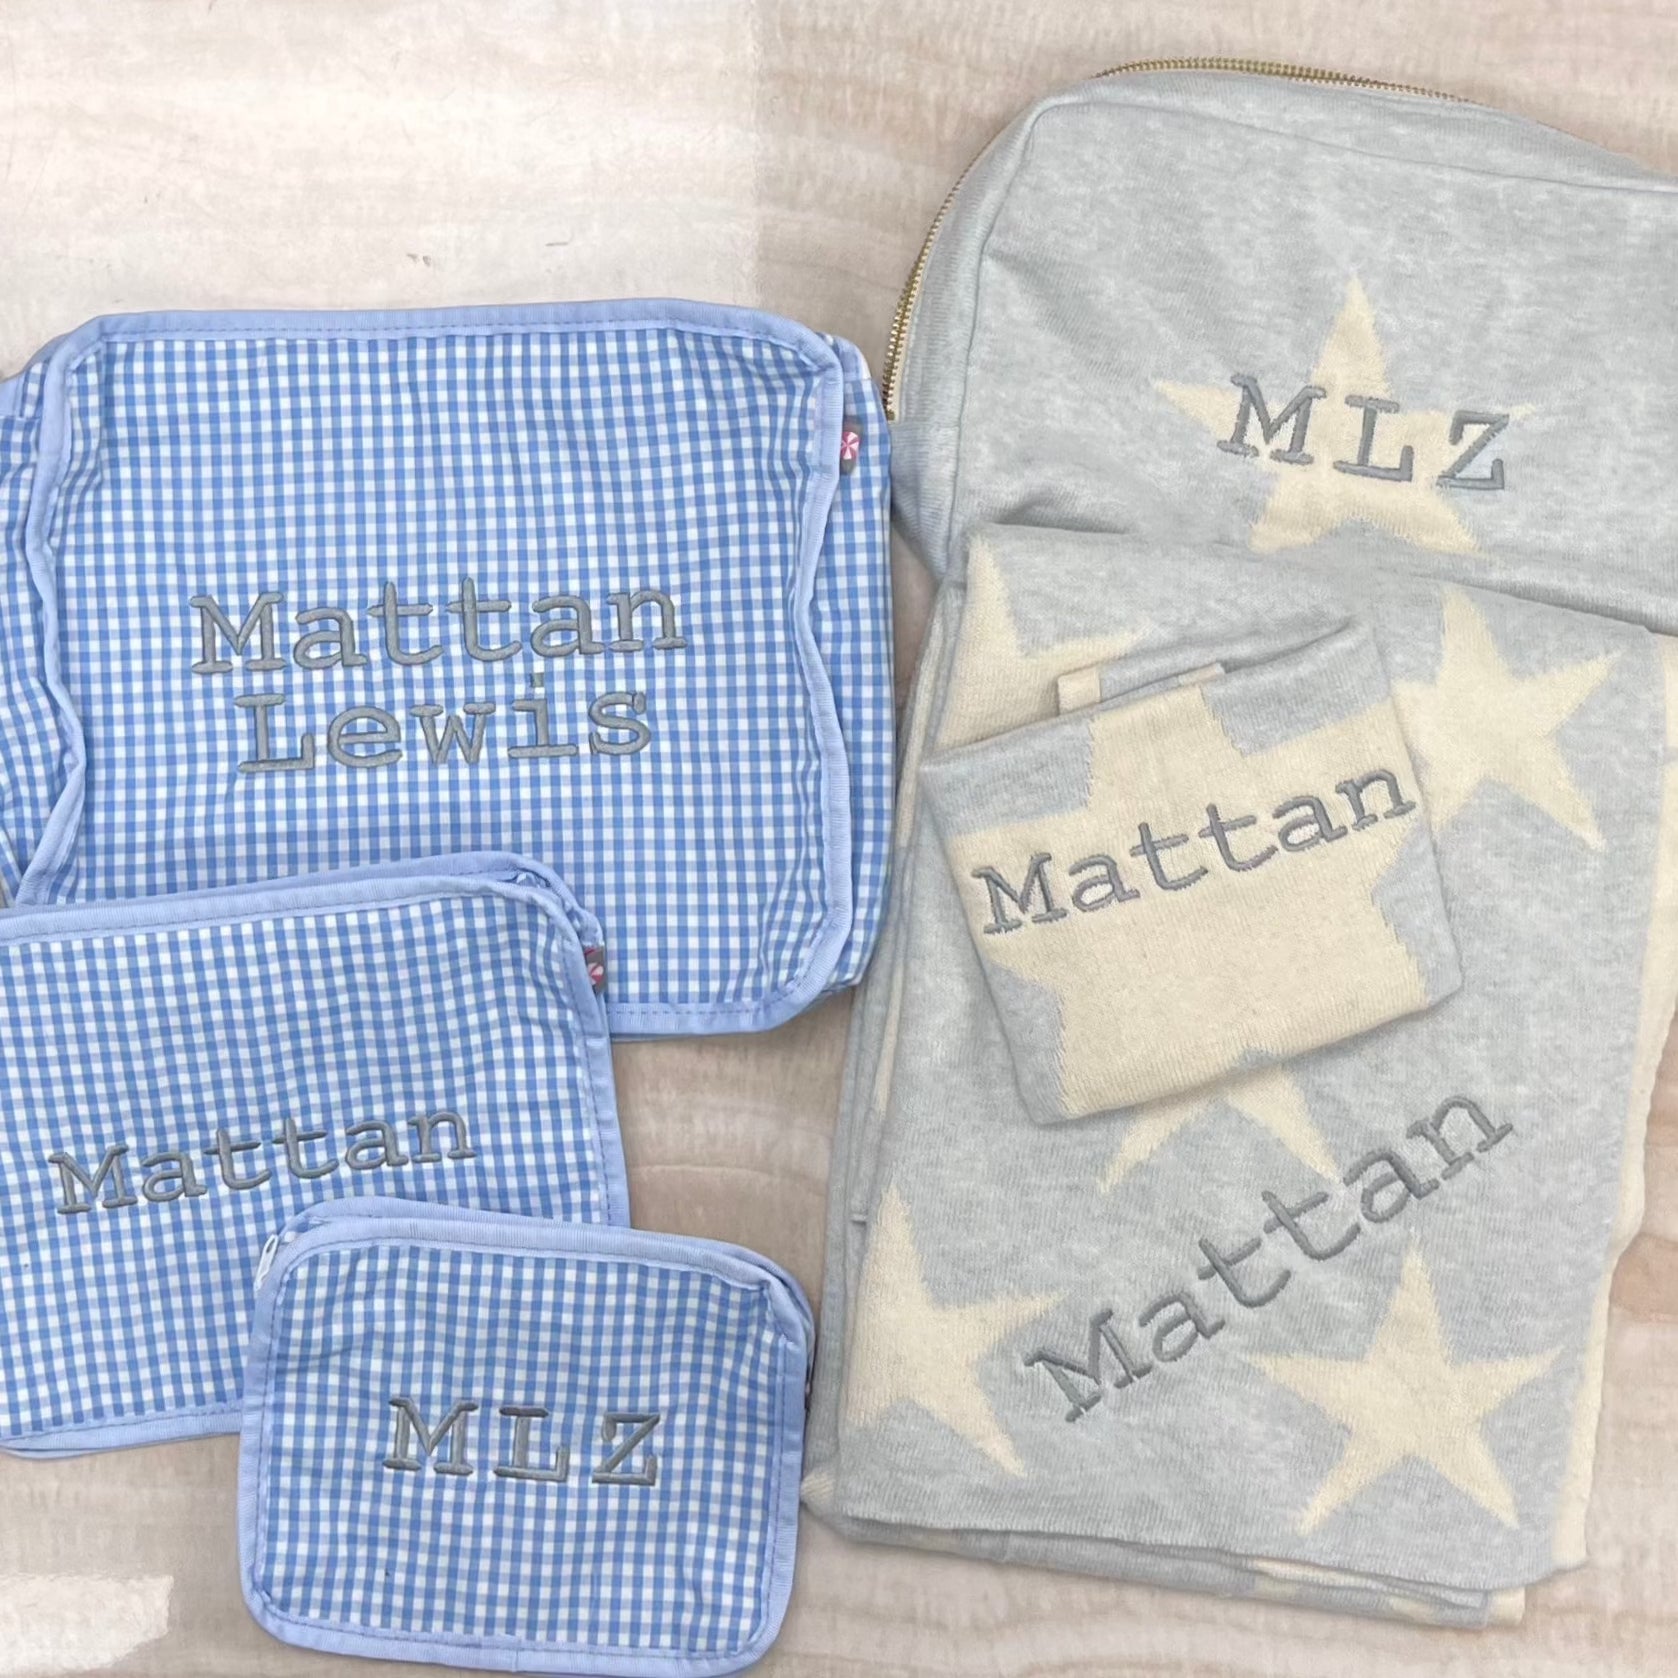 Star 3 Piece Knitted Baby Travel Set - Sky / Natural - Give Wink